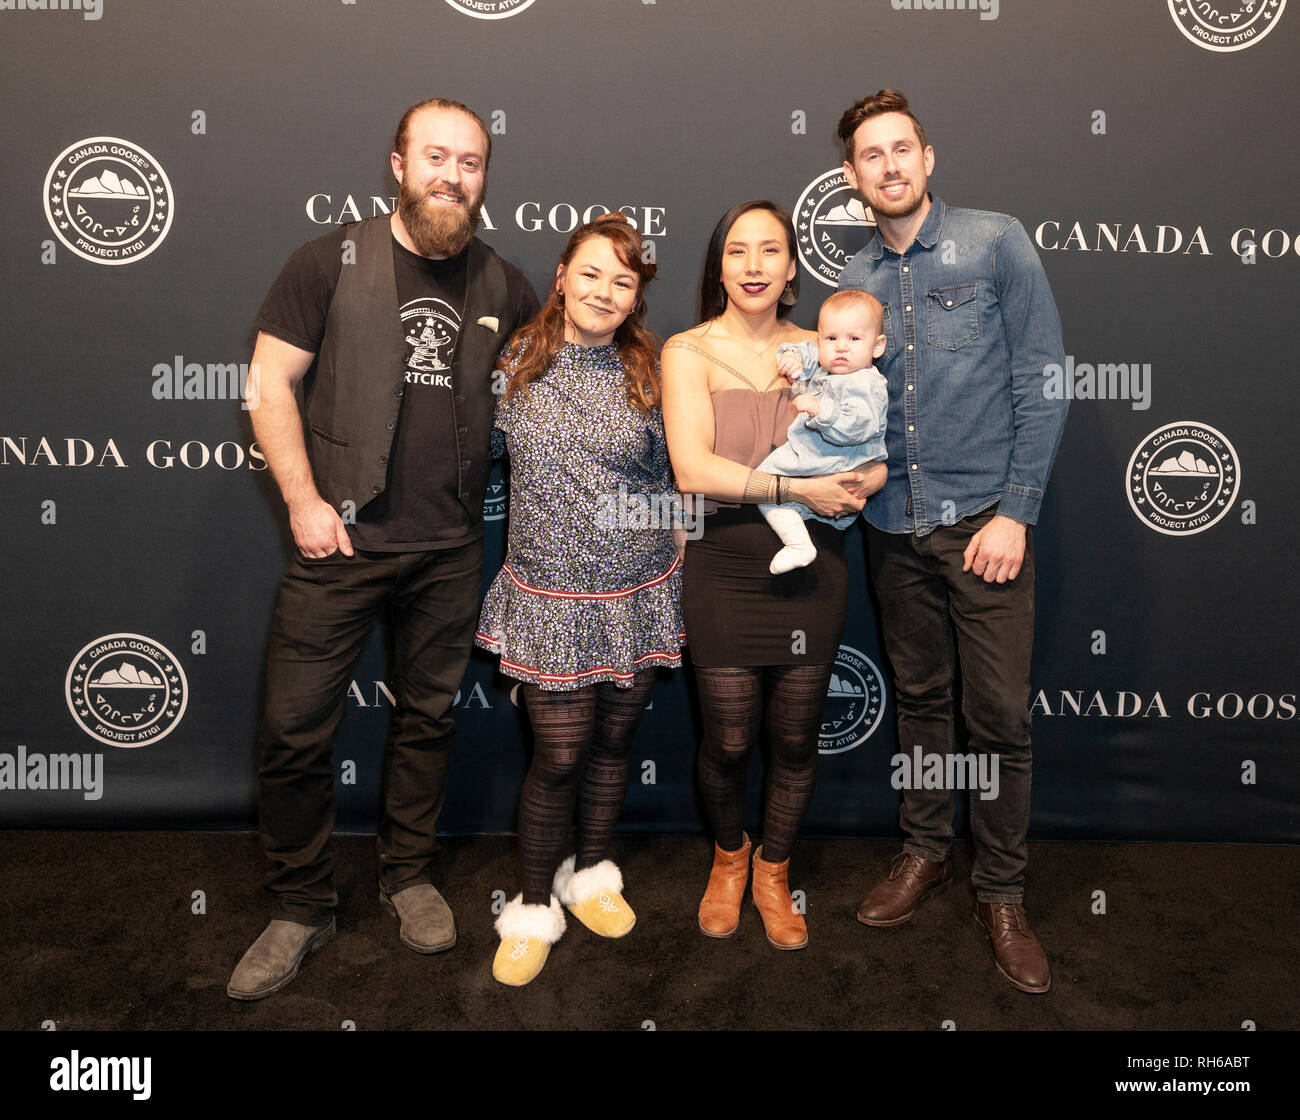 New York, NY - January 31, 2019: The Jerry Cans band attends Canada Goose Celebrates the Launch of Project Atigi at Studio 525 Credit: lev radin/Alamy Live News Stock Photo